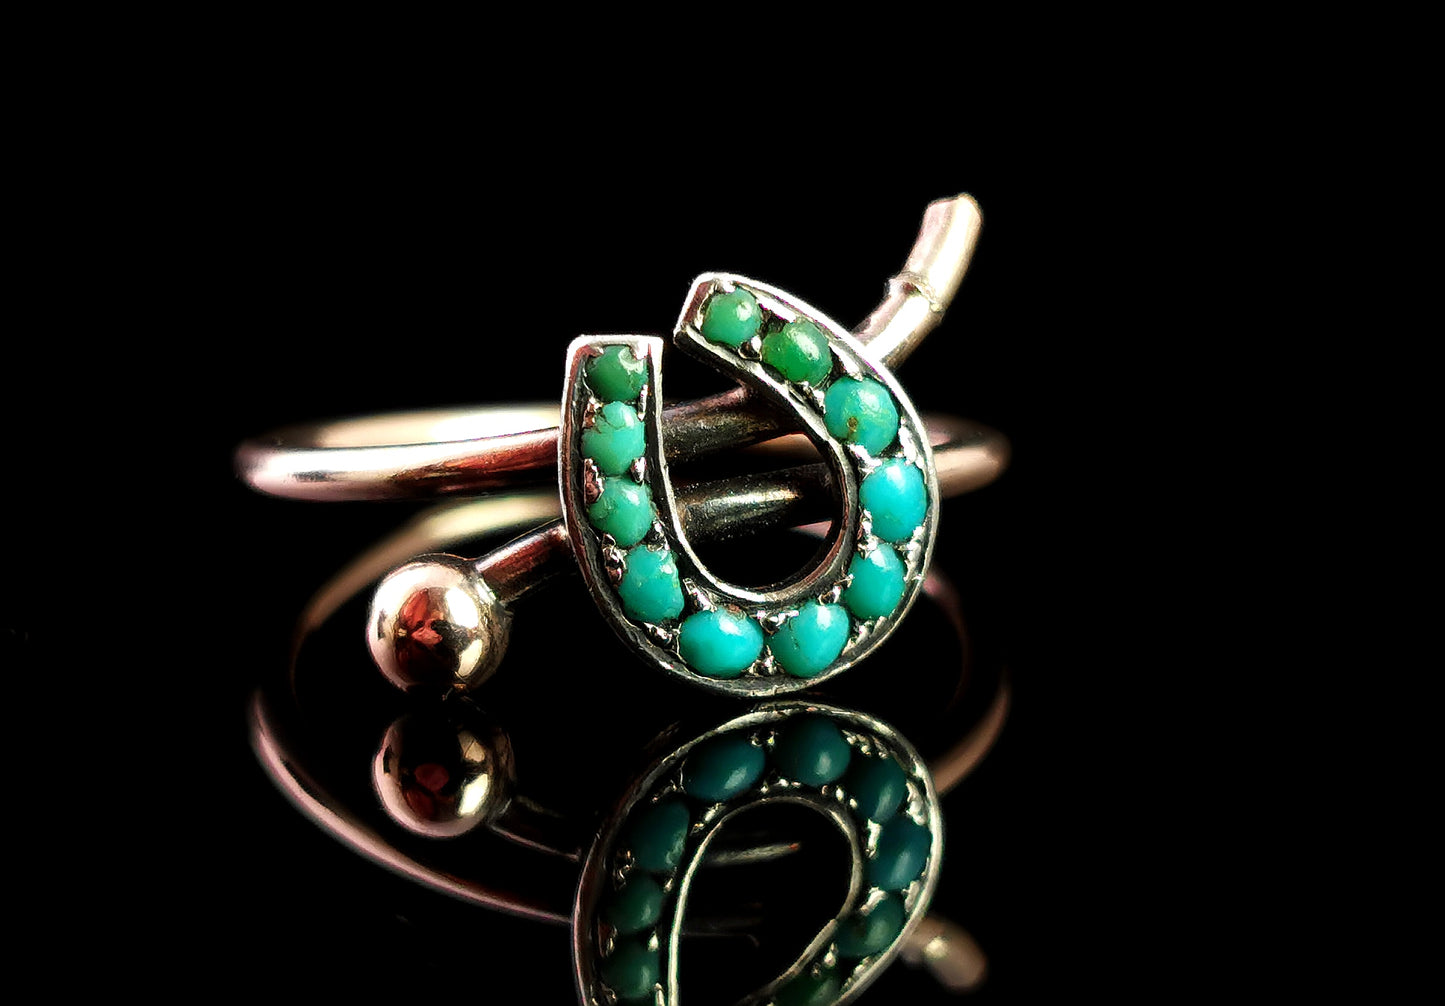 Antique Turquoise horseshoe and crop ring, 9ct Rose gold and sterling silver